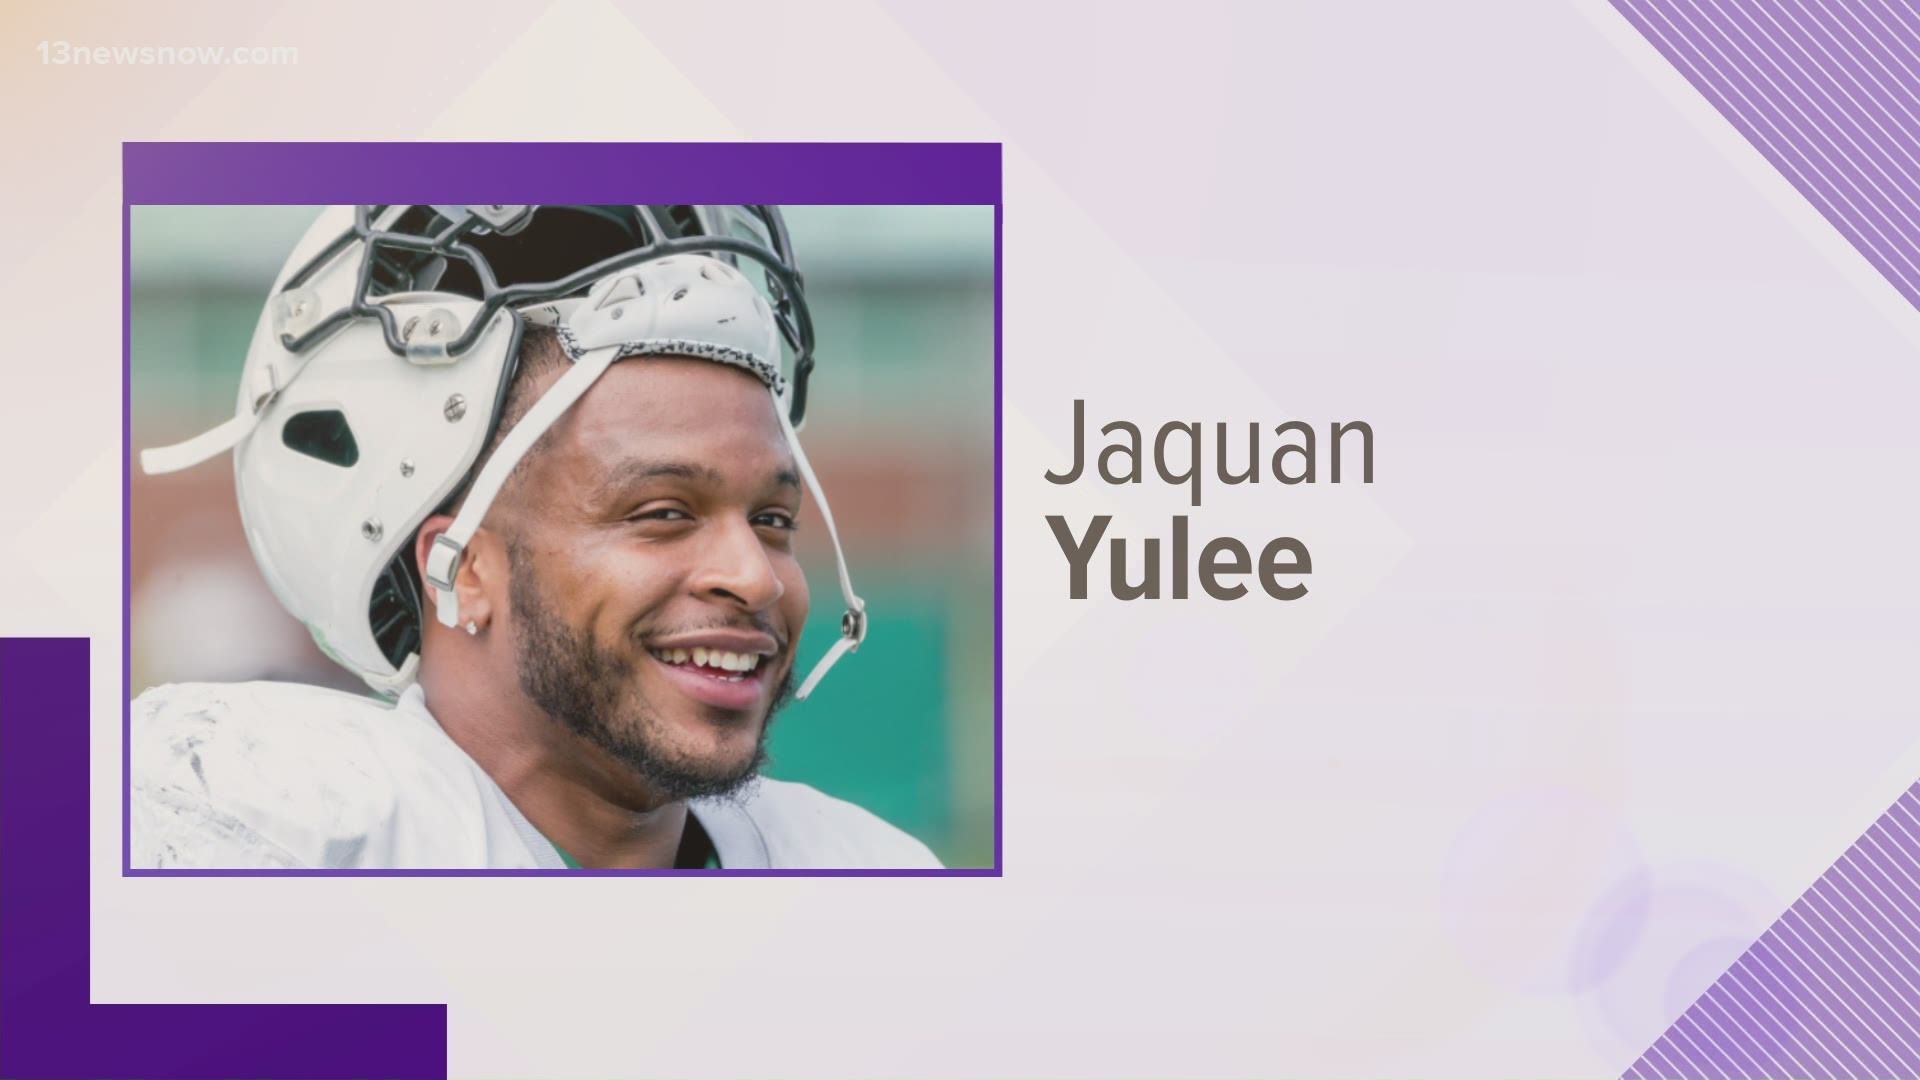 Jaquan Rashad Yulee, 24, of Suffolk, died after his vehicle flipped over. Yulee attended Indian River High School and played college football at Marshall University.